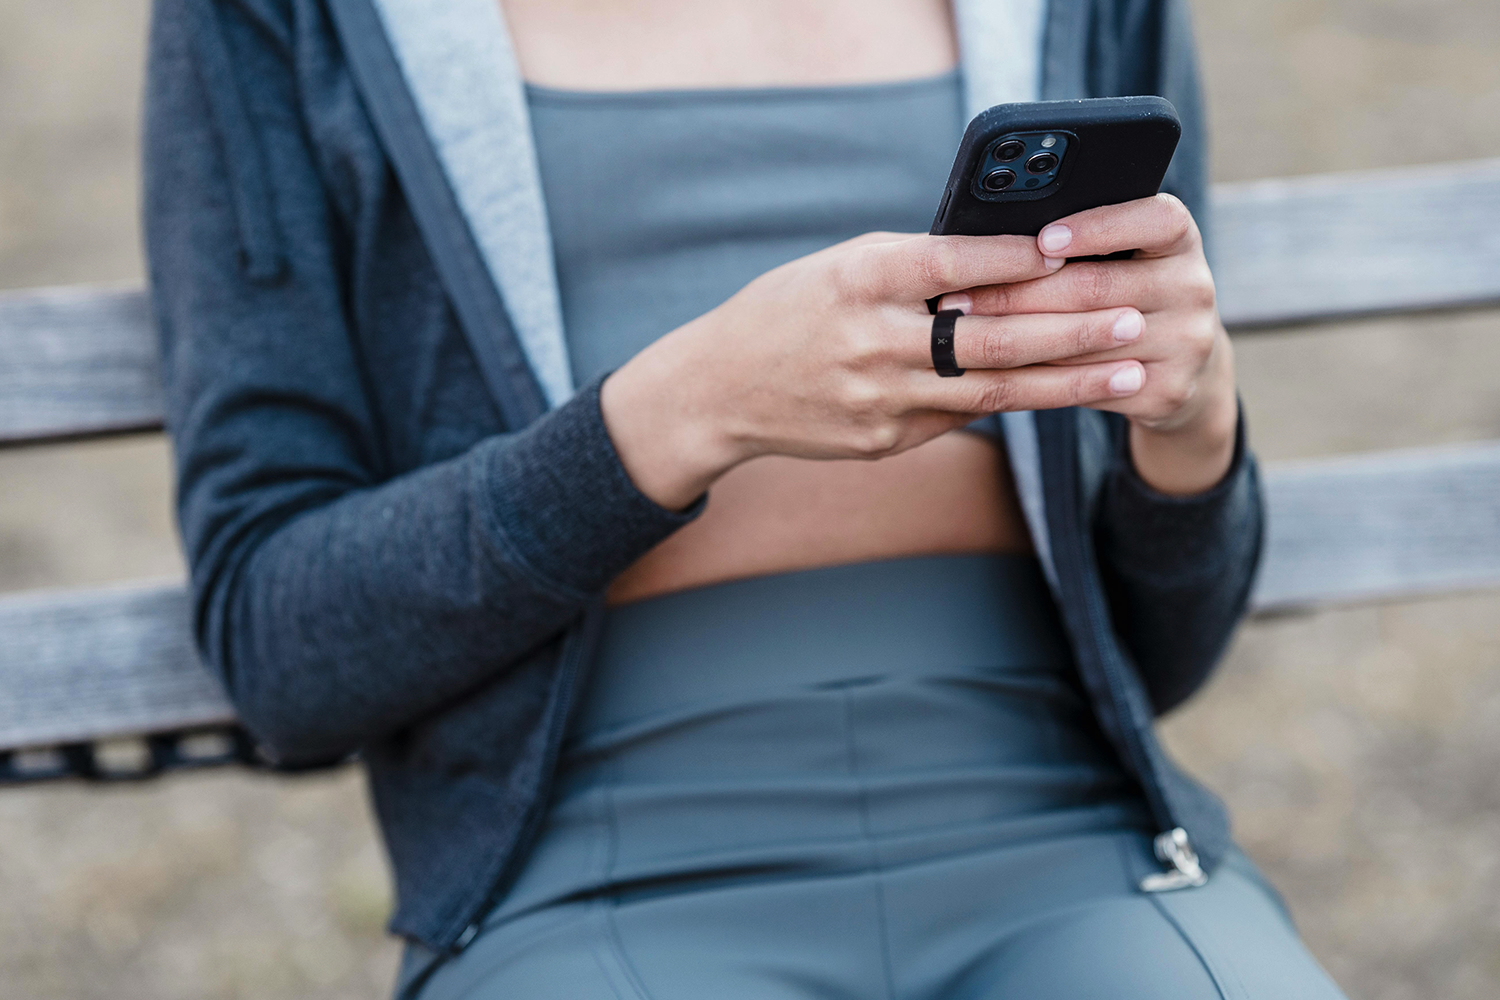 A promotional image showing someone wearing the ExerRing smart ring.